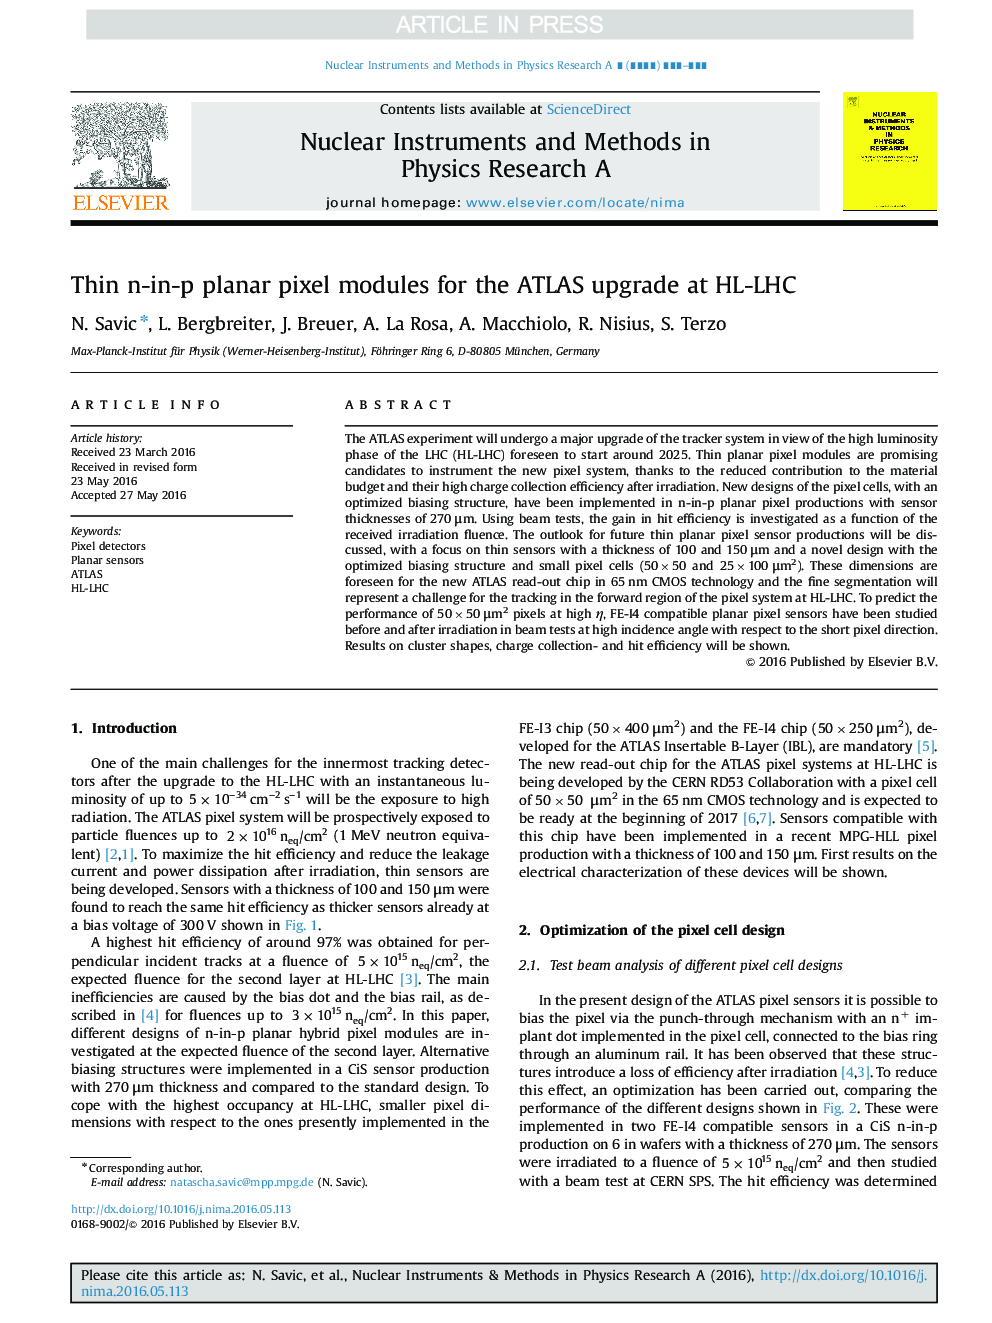 Thin n-in-p planar pixel modules for the ATLAS upgrade at HL-LHC